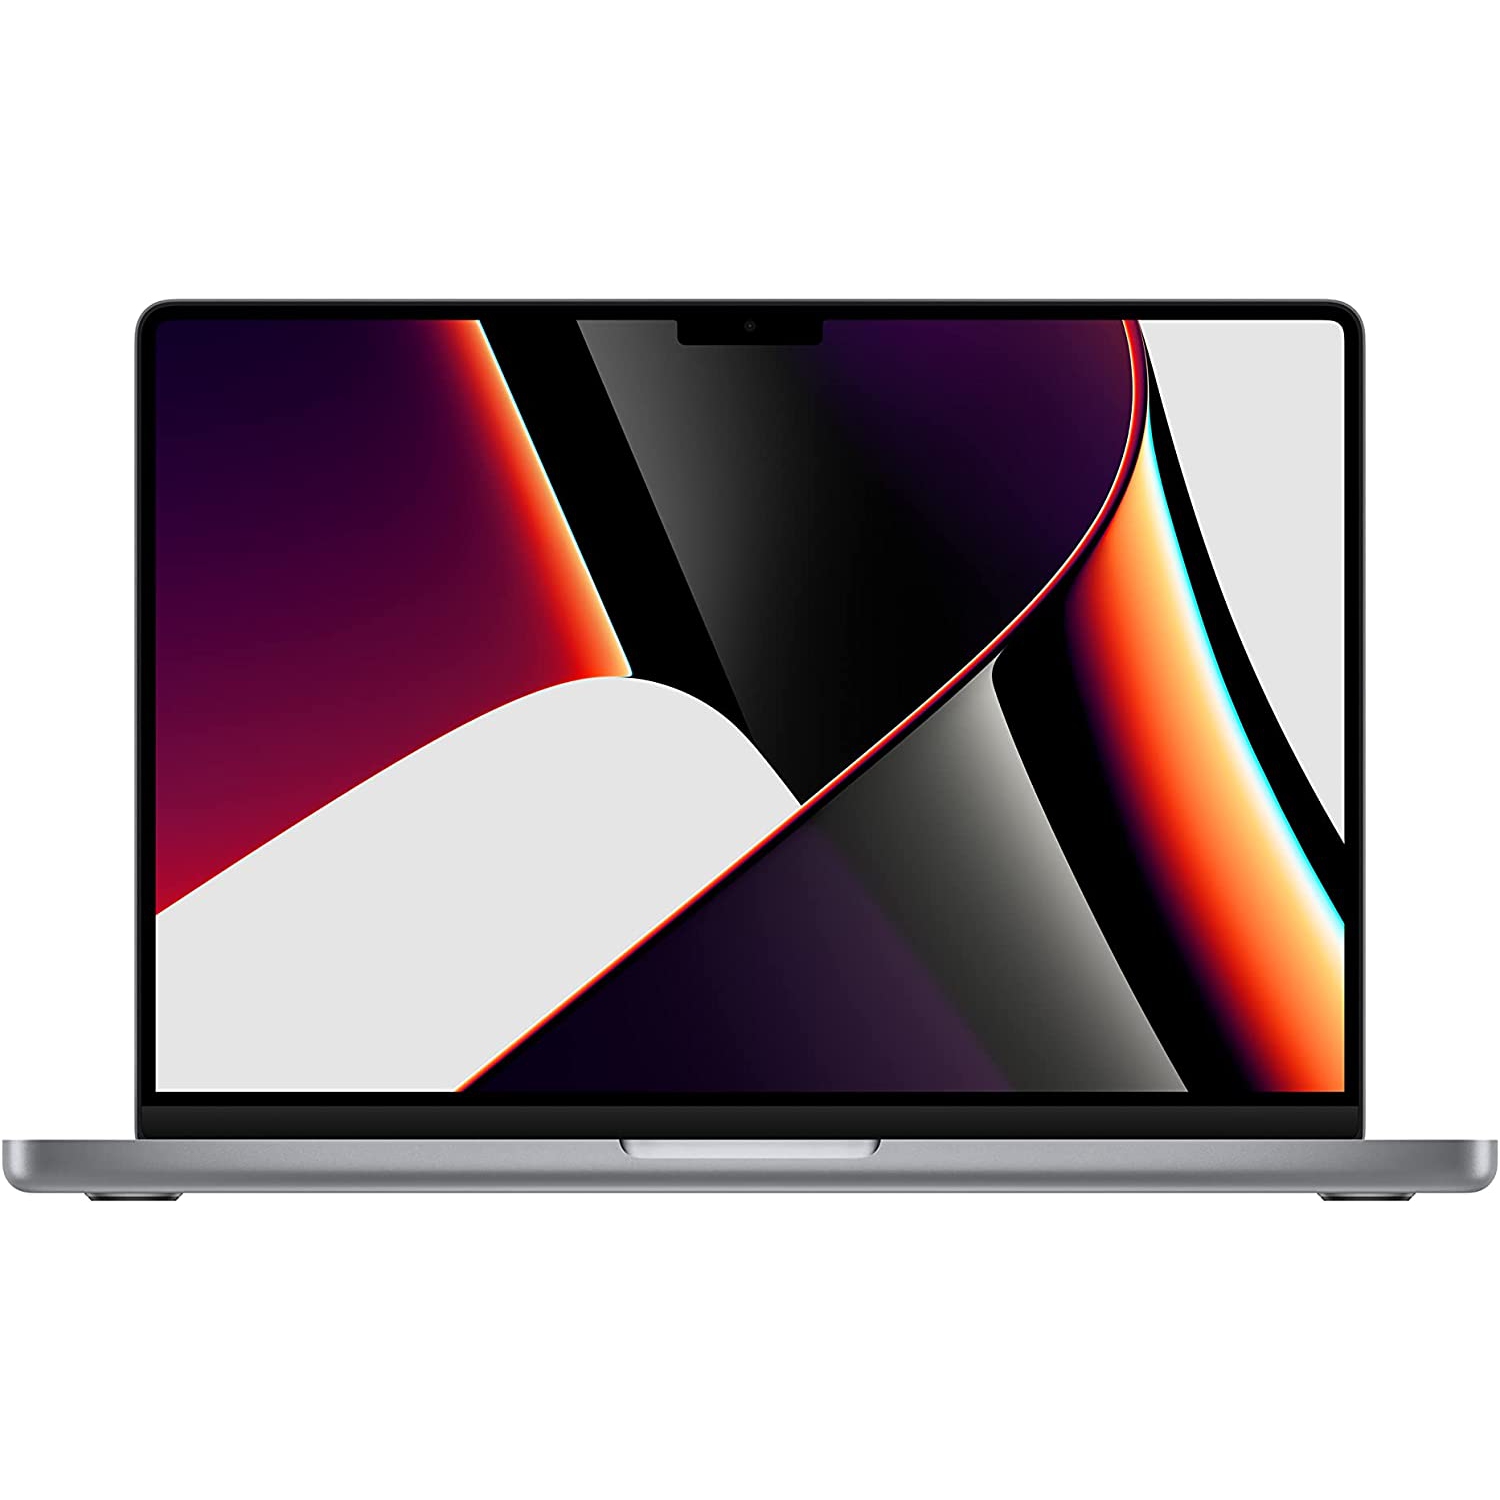 2021 Apple MacBook Pro- 14-inch, Apple M1 Pro chip - with 8‑core CPU and 14‑core GPU - 16GB RAM + 512GB SSD - Brand New- Sealed - Space Grey - English